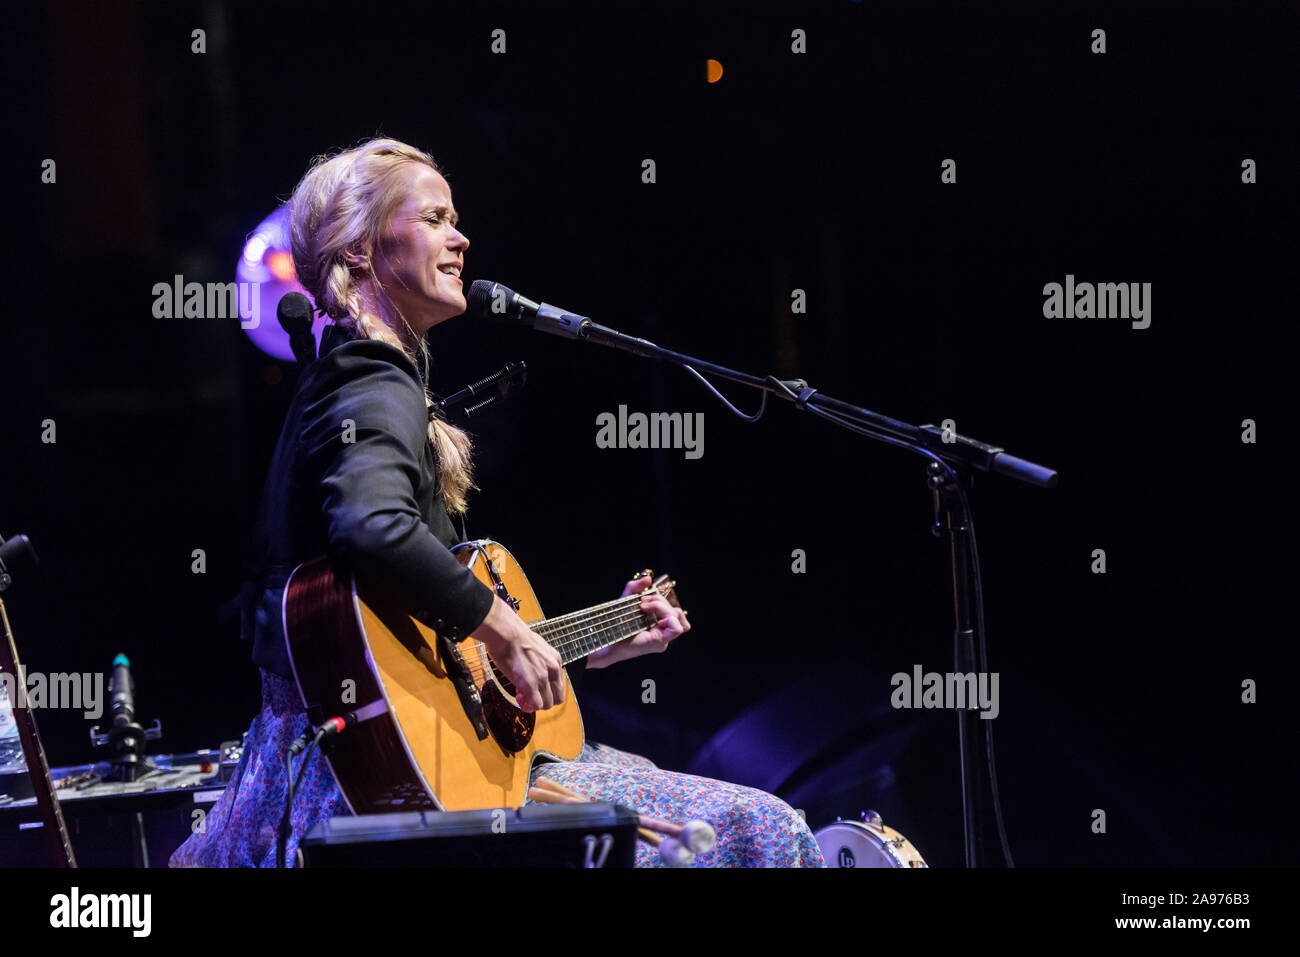 Tina Dico High Resolution Stock Photography and Images - Alamy